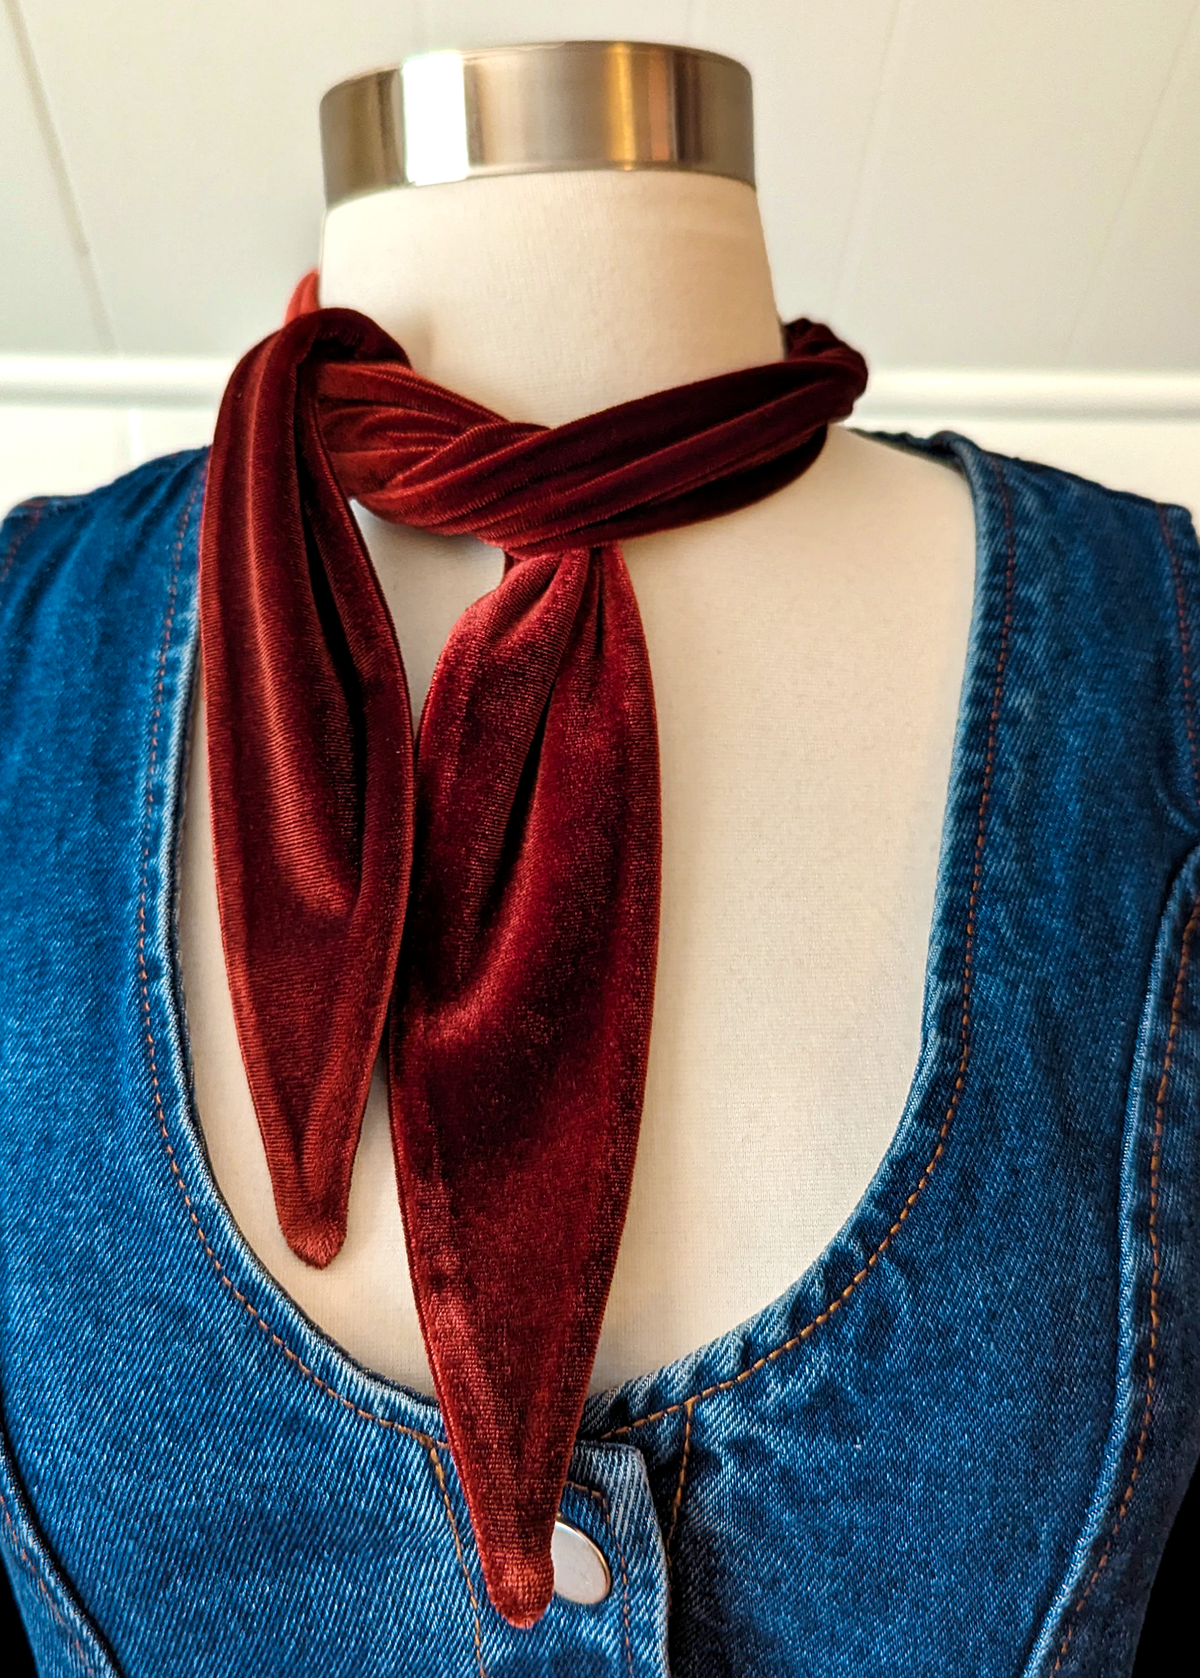 70s inspired Brick Red Velvet Scarf Neck Tie by I'm With the Band, handmade in California